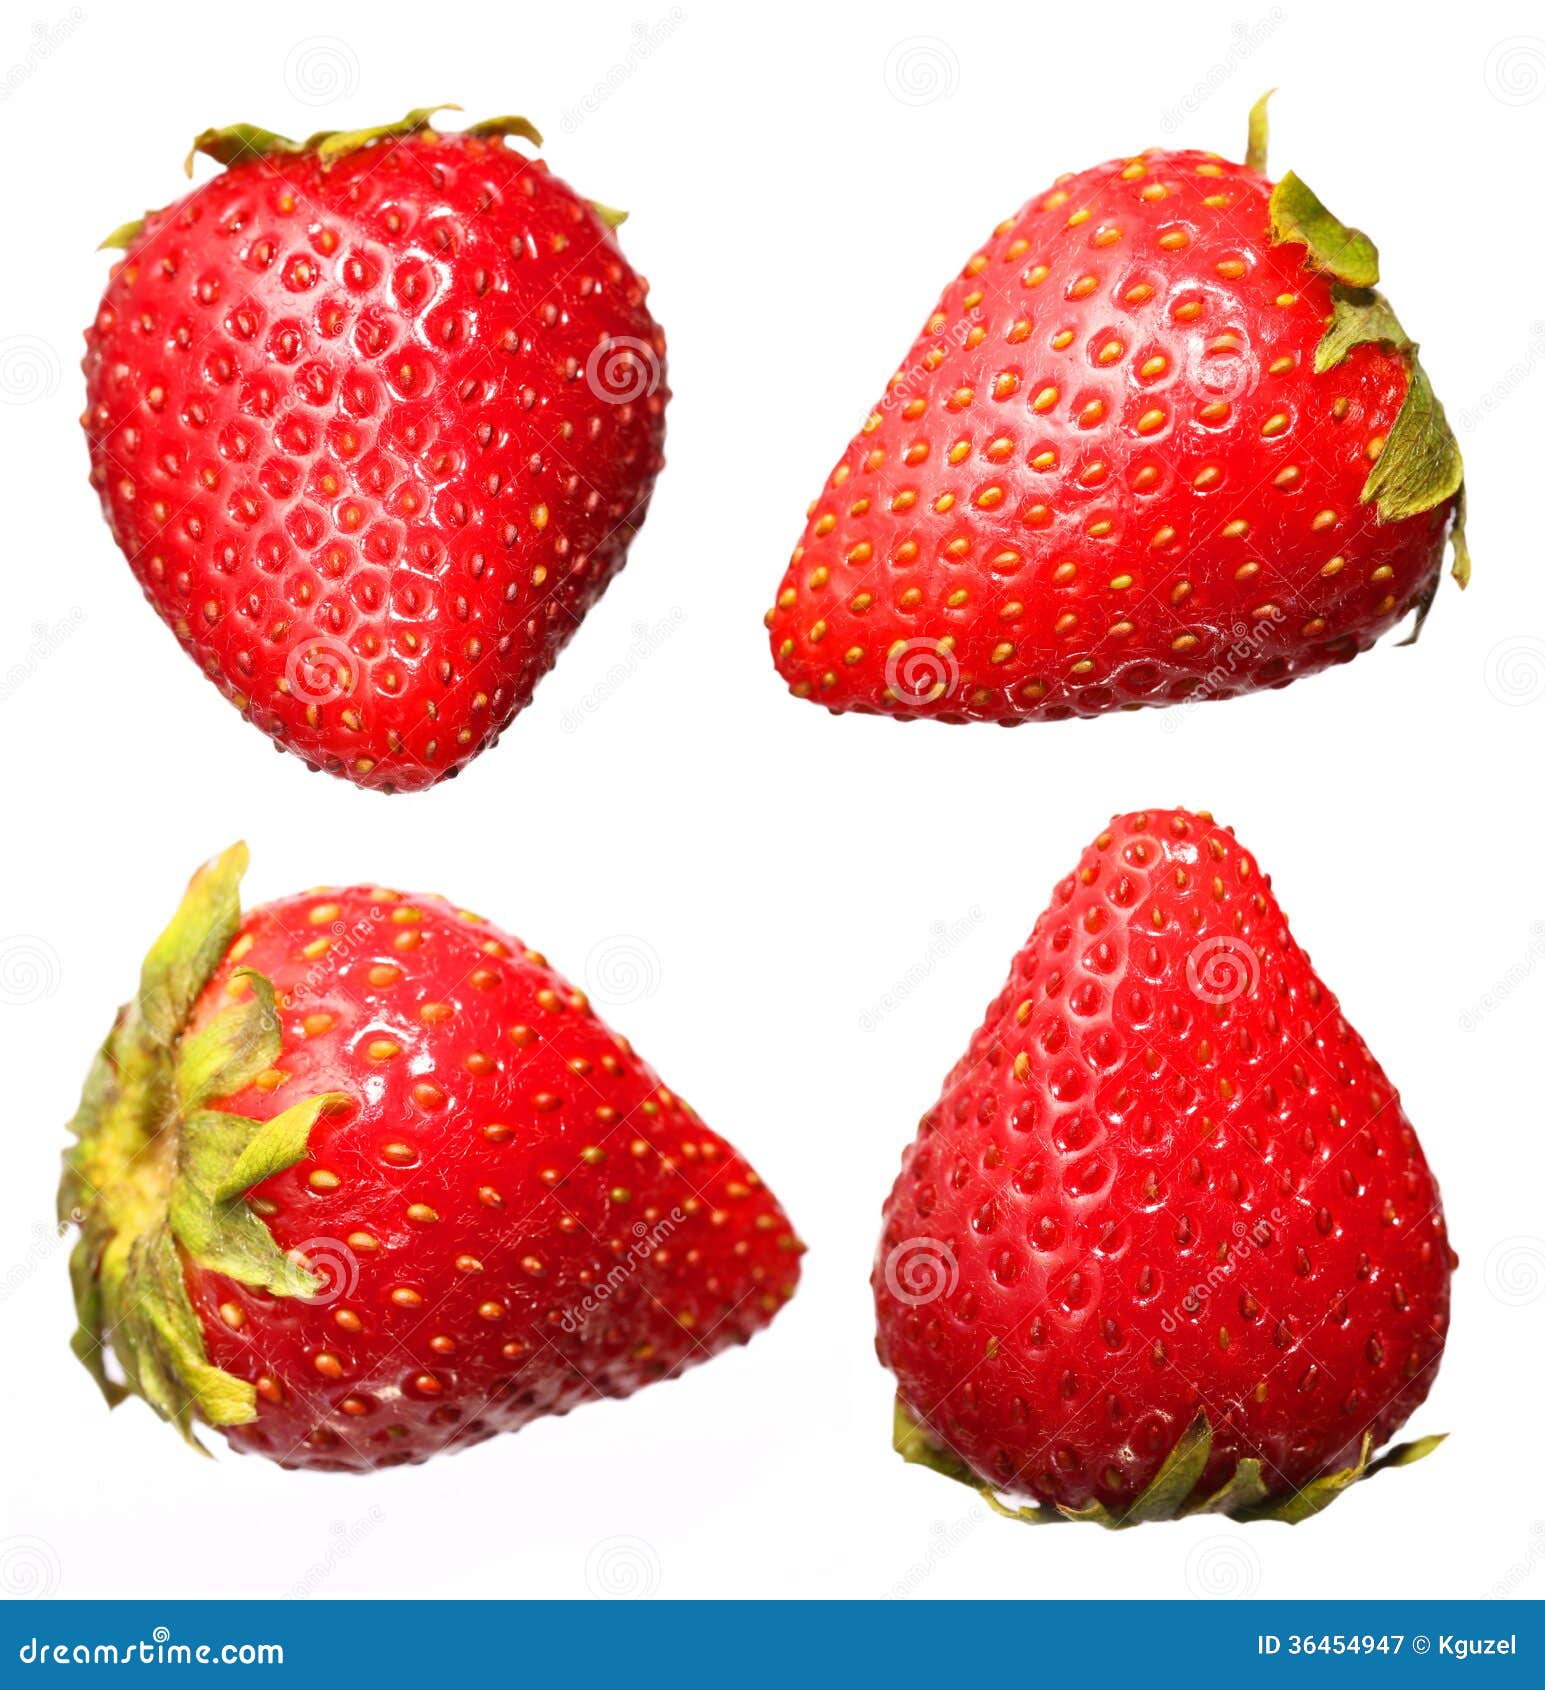 strawberry fruit collections, 